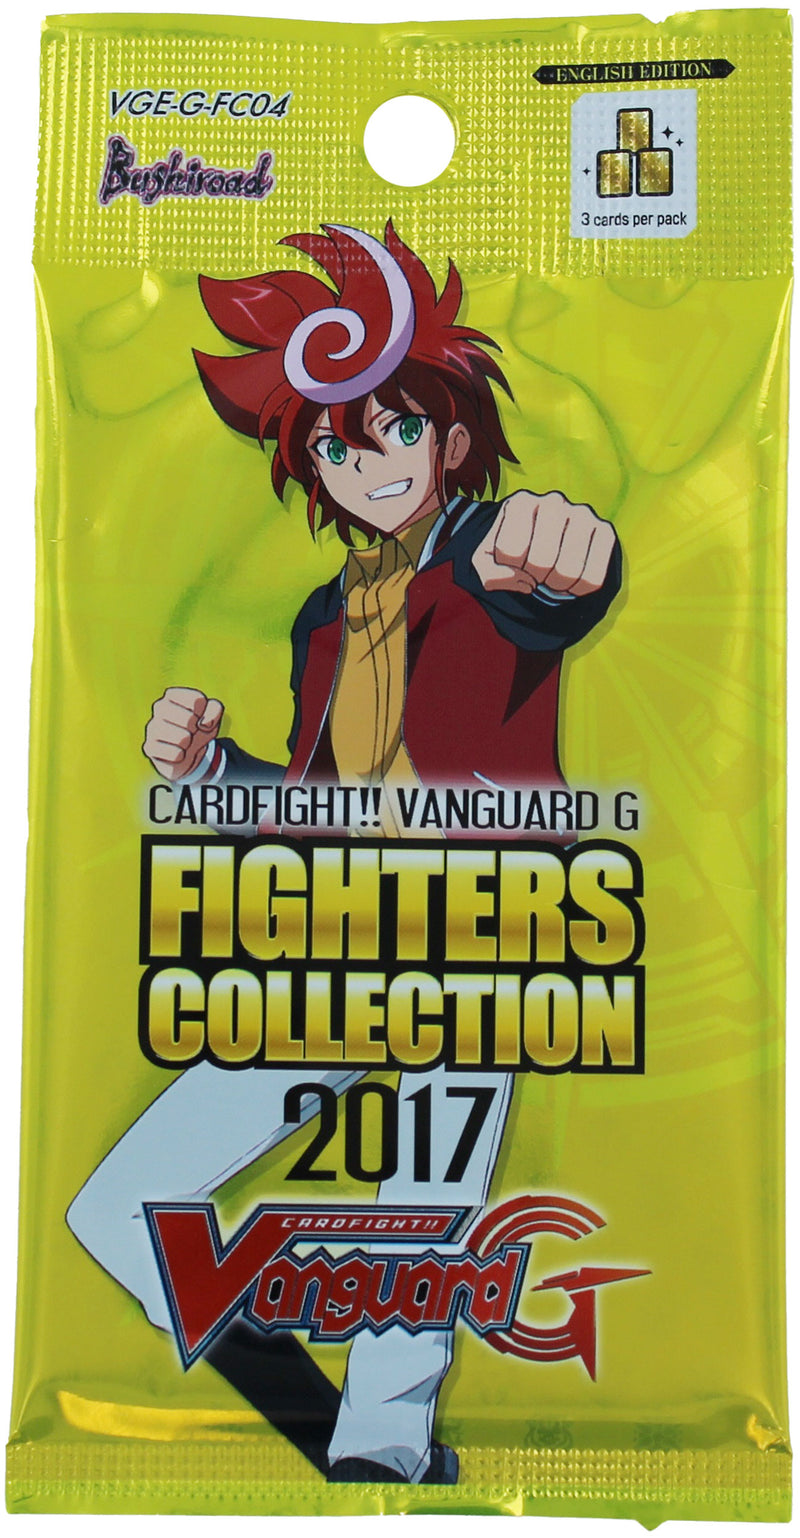 Cardfight!! Vanguard Fighters Collection 2017 Booster Pack